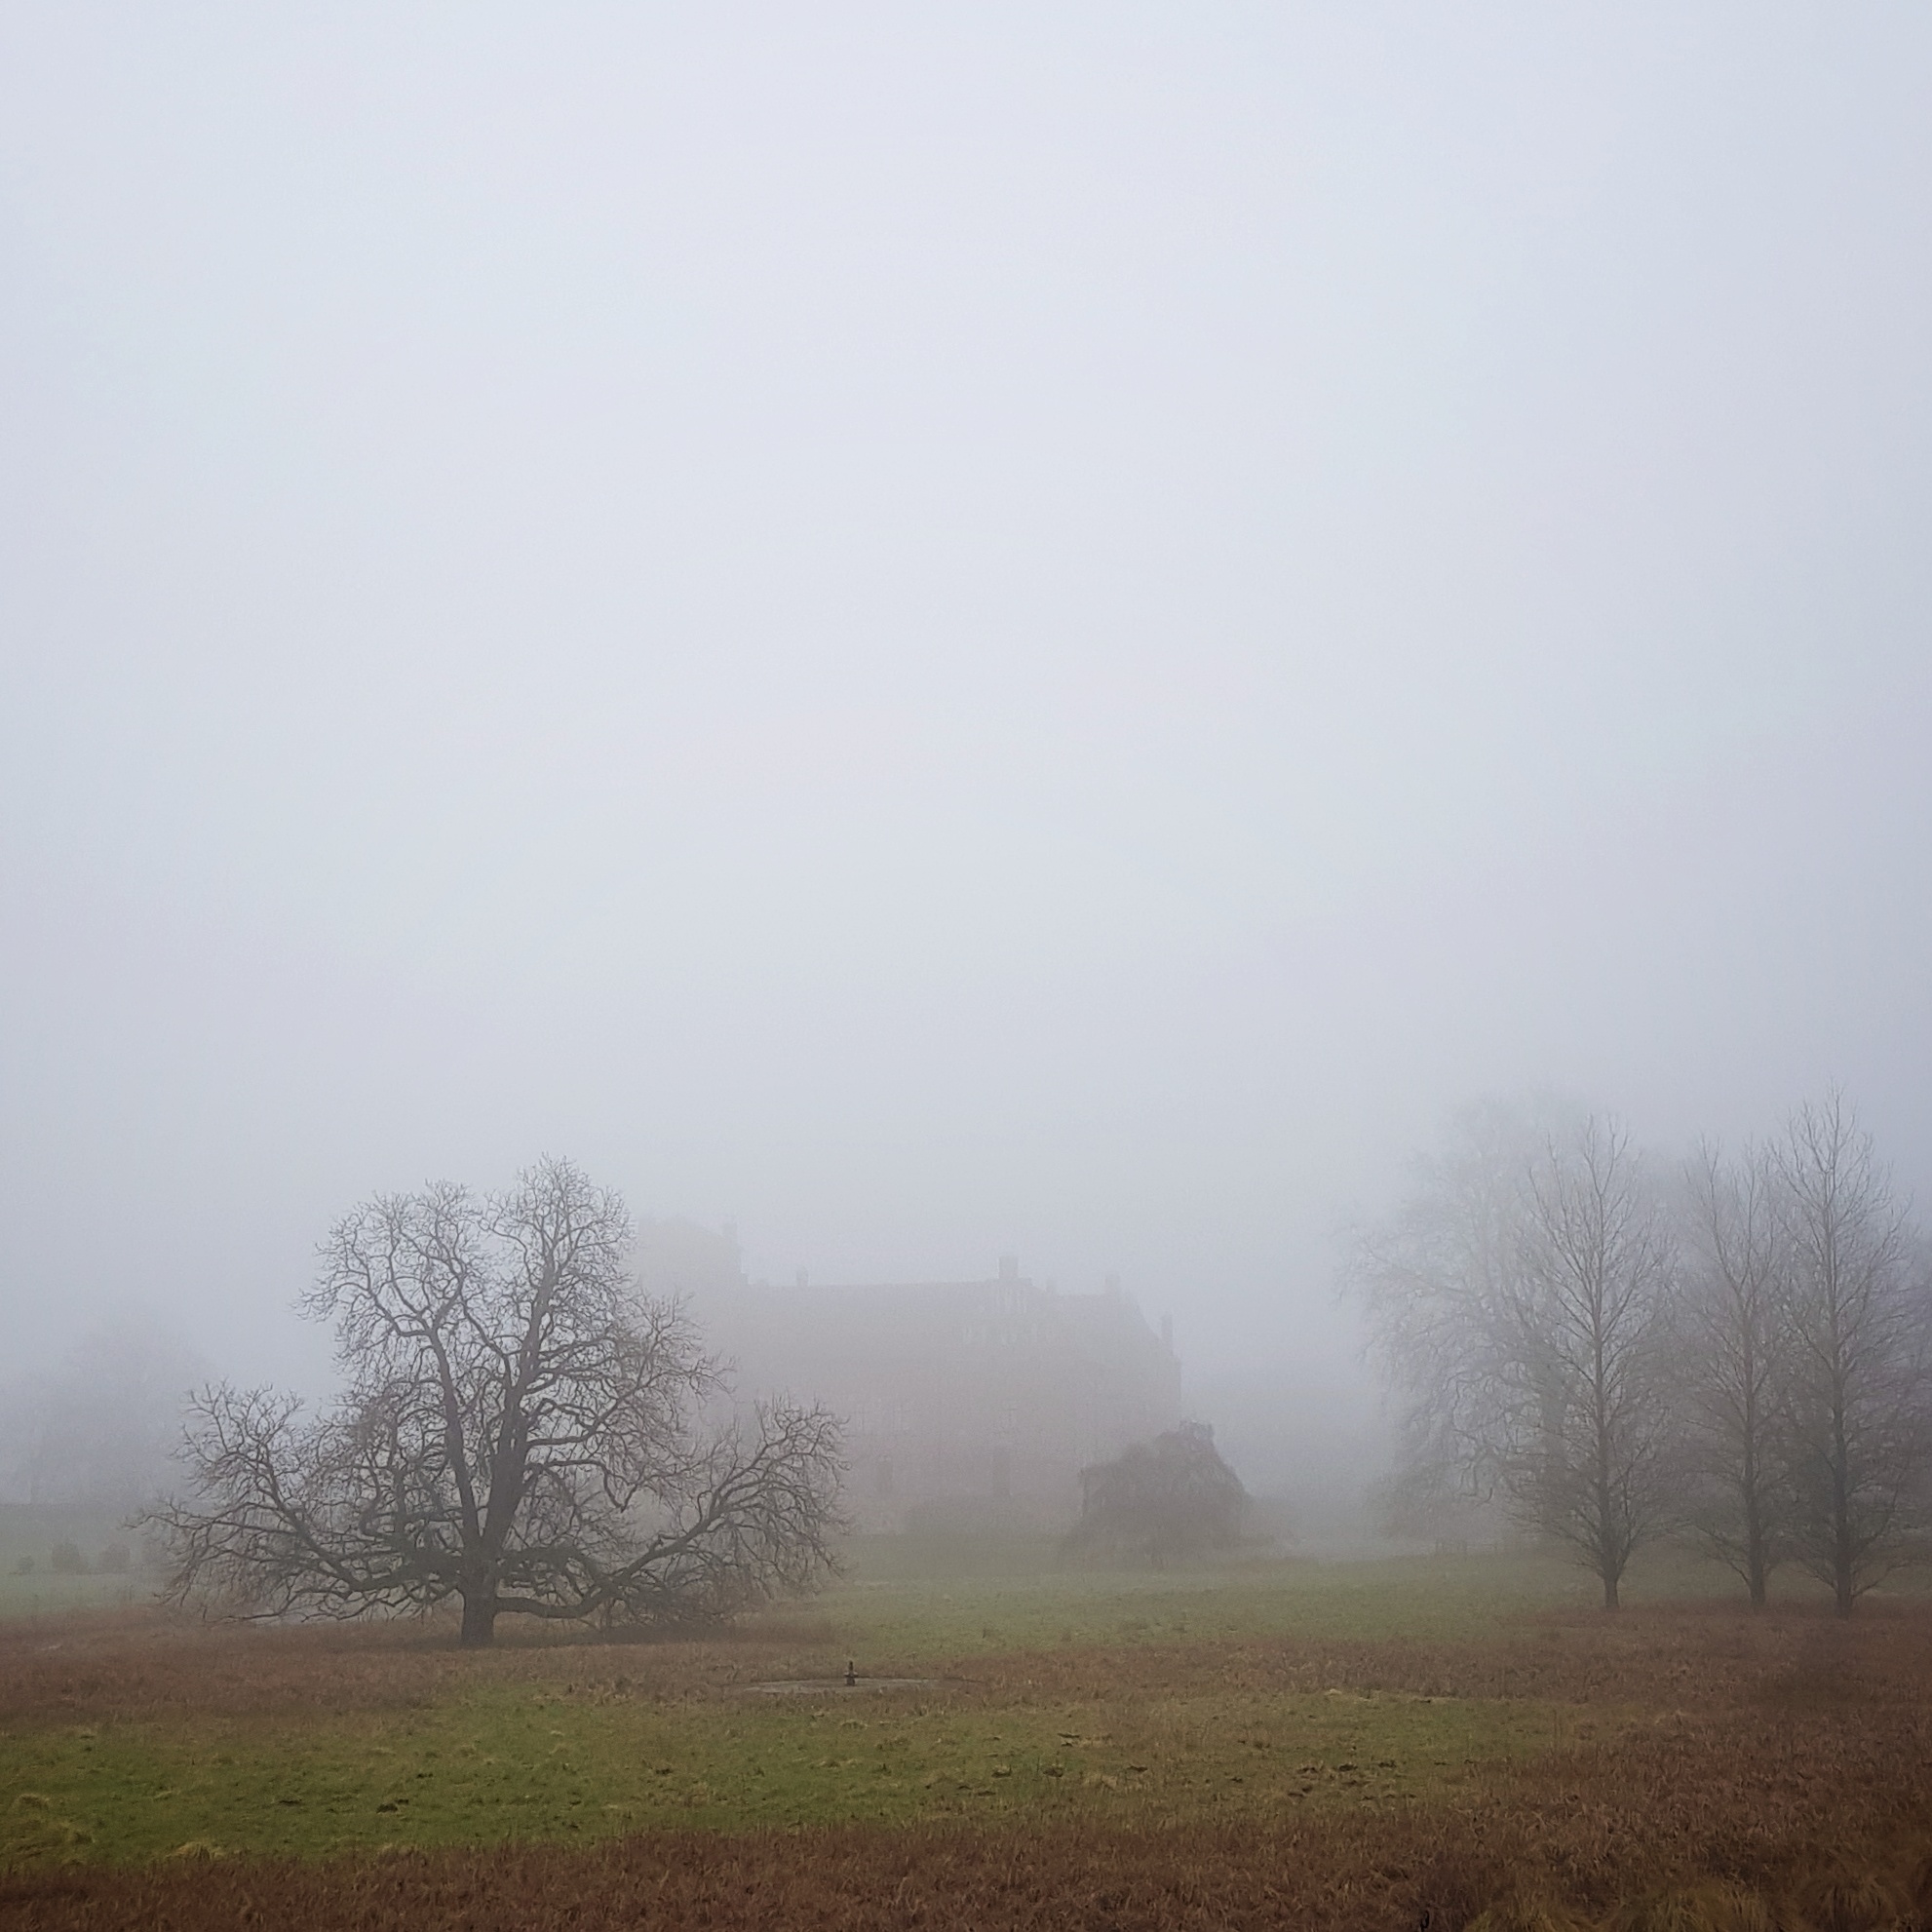 Day 31: January 31 - Castle in the Mist